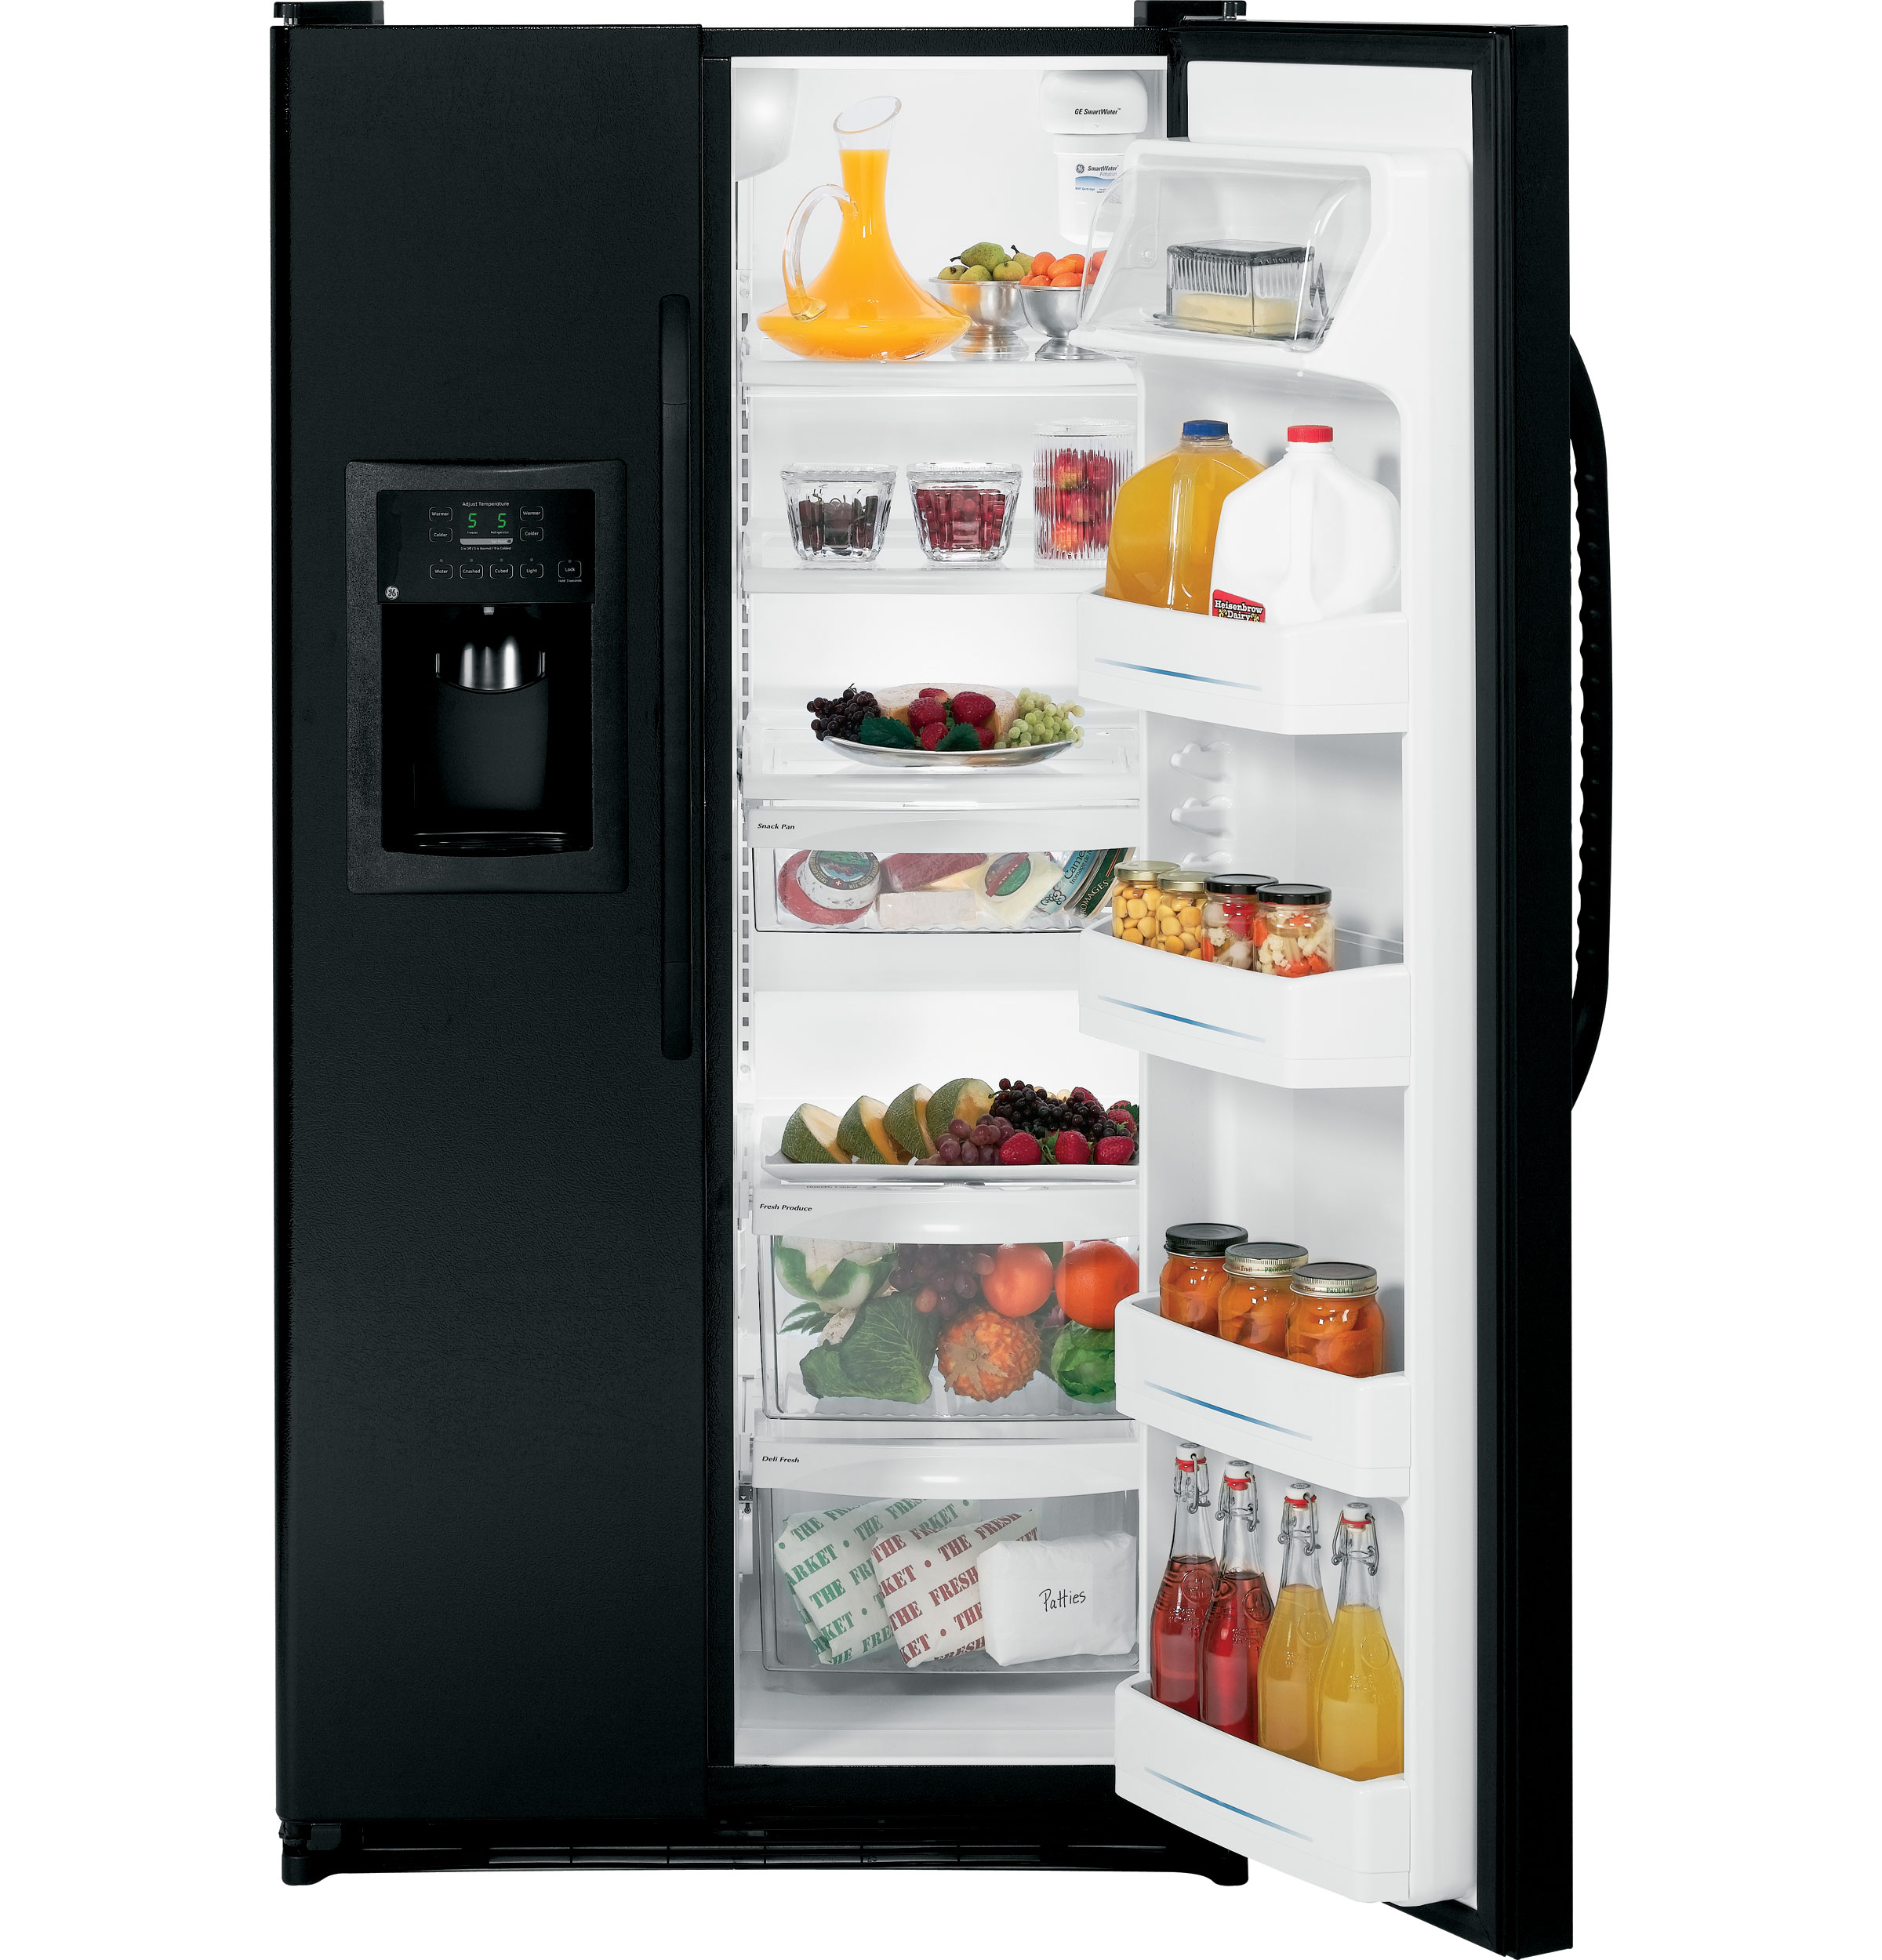 GE® ENERGY STAR® 22.1 Cu. Ft. Side-By-Side Refrigerator with Dispenser